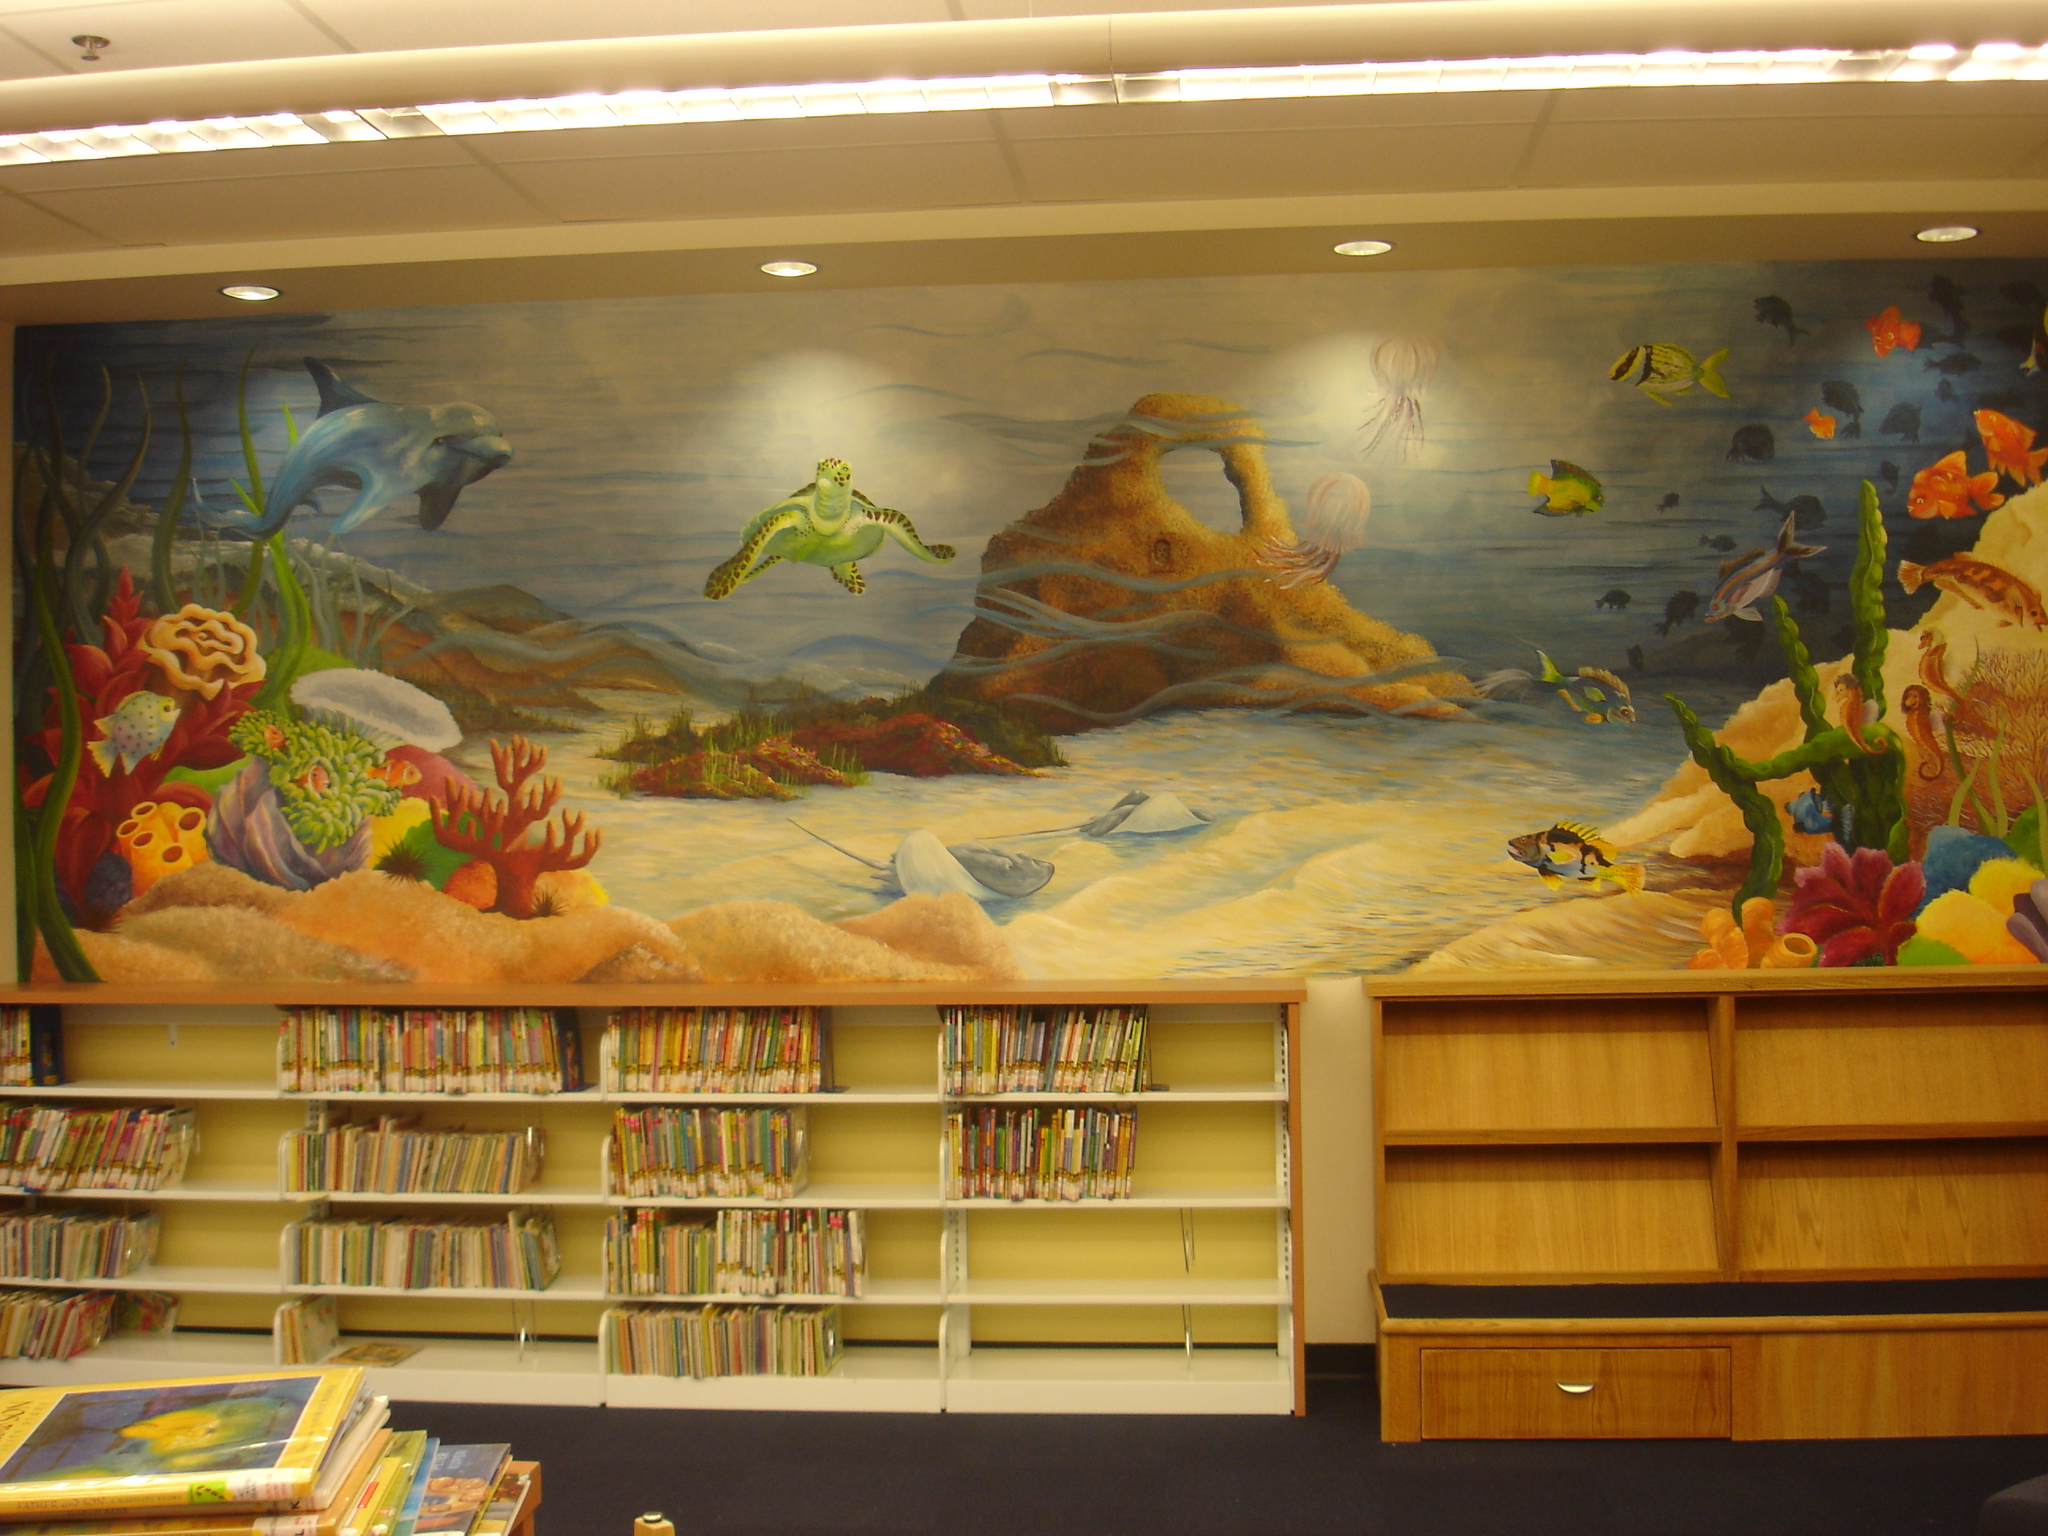 Mural Painted in Children's Section of Library